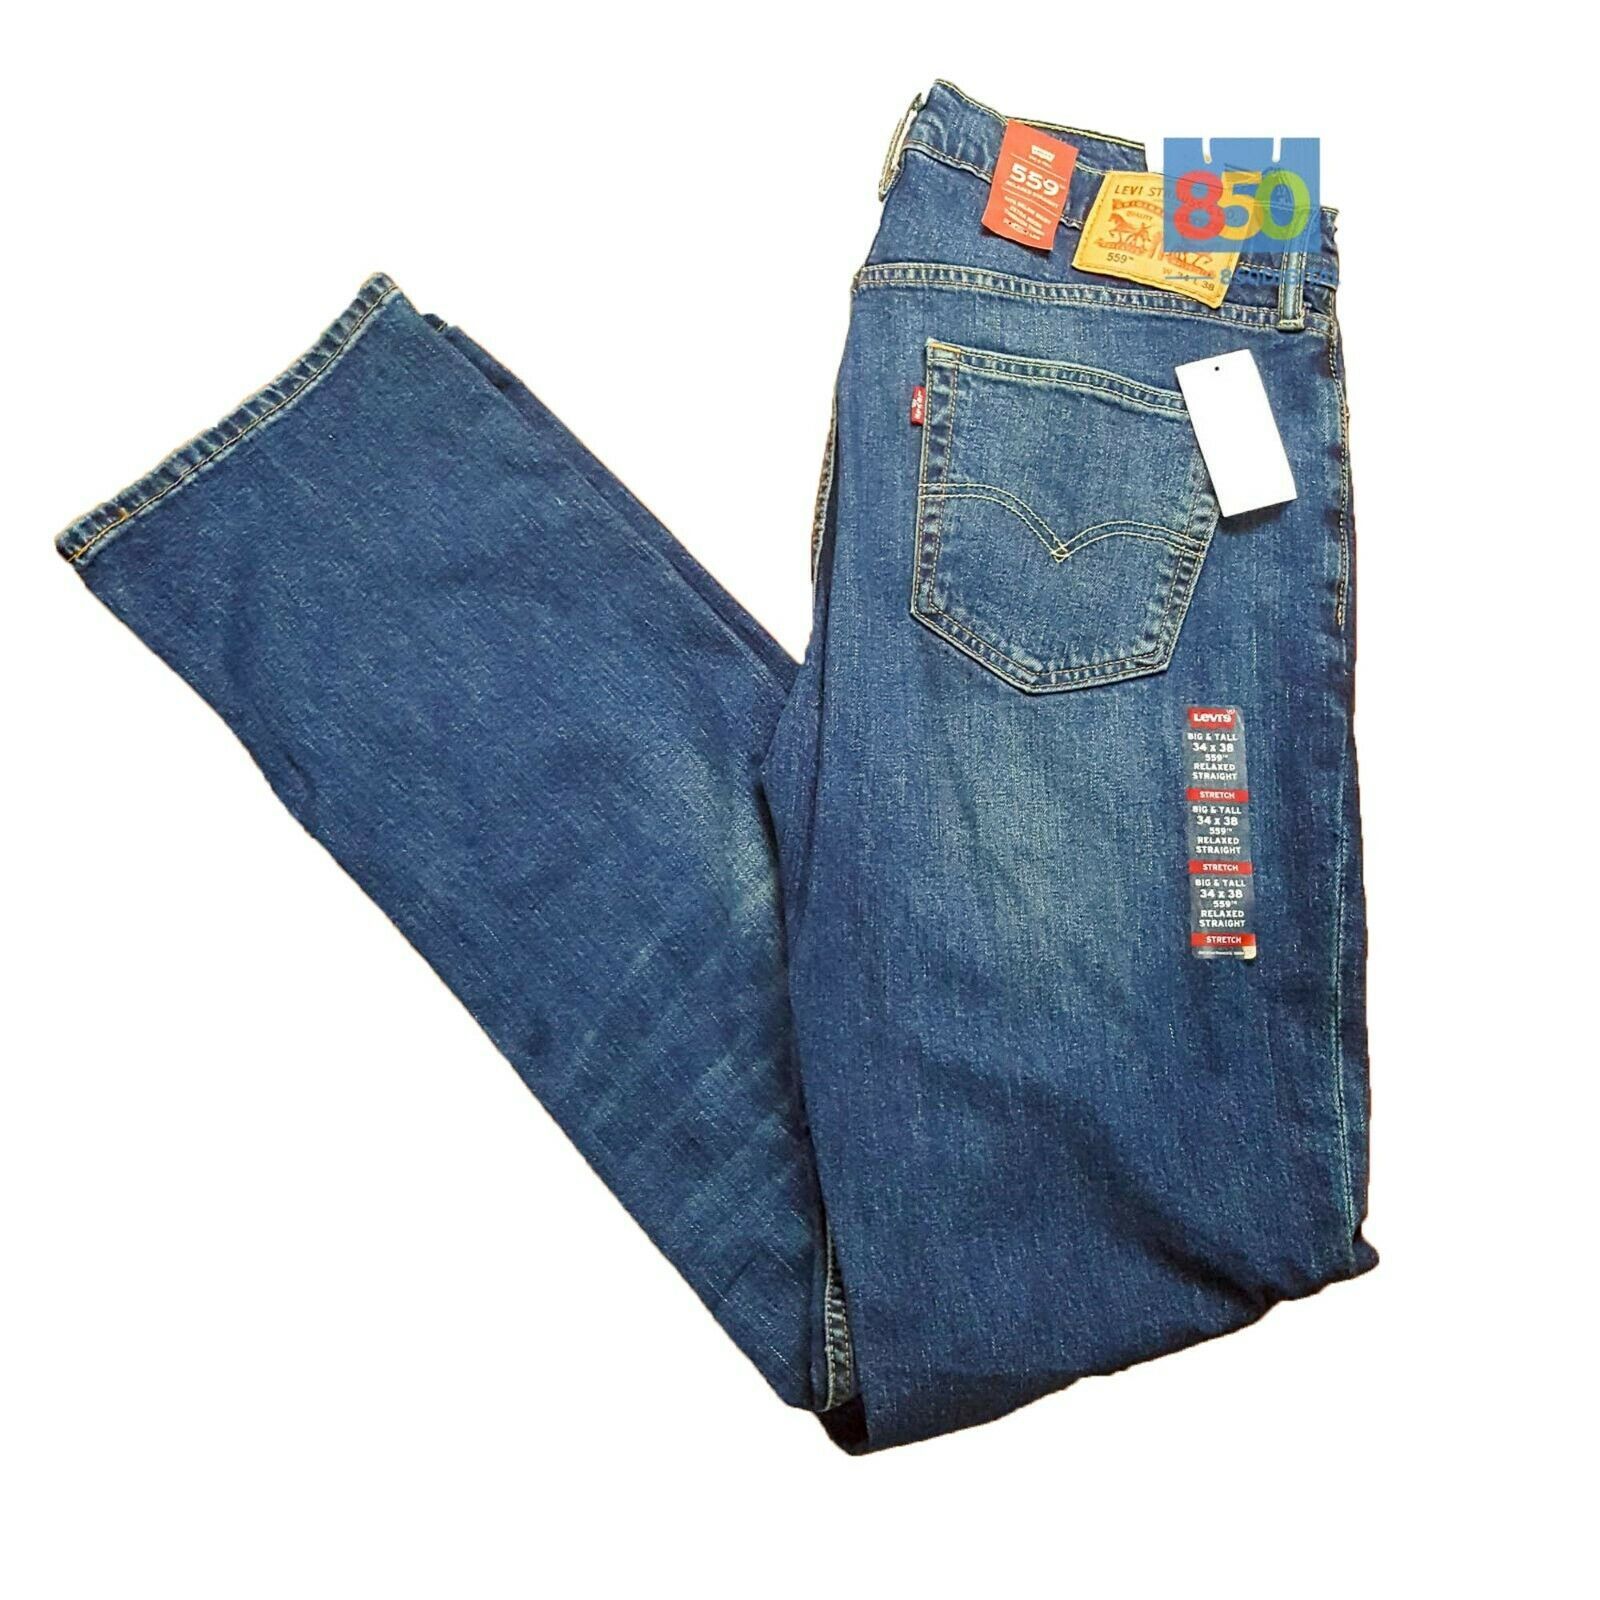 Levis 559 Relaxed Straight Stretch Blue Jeans 34 x 38 01559-0065 BIG ...